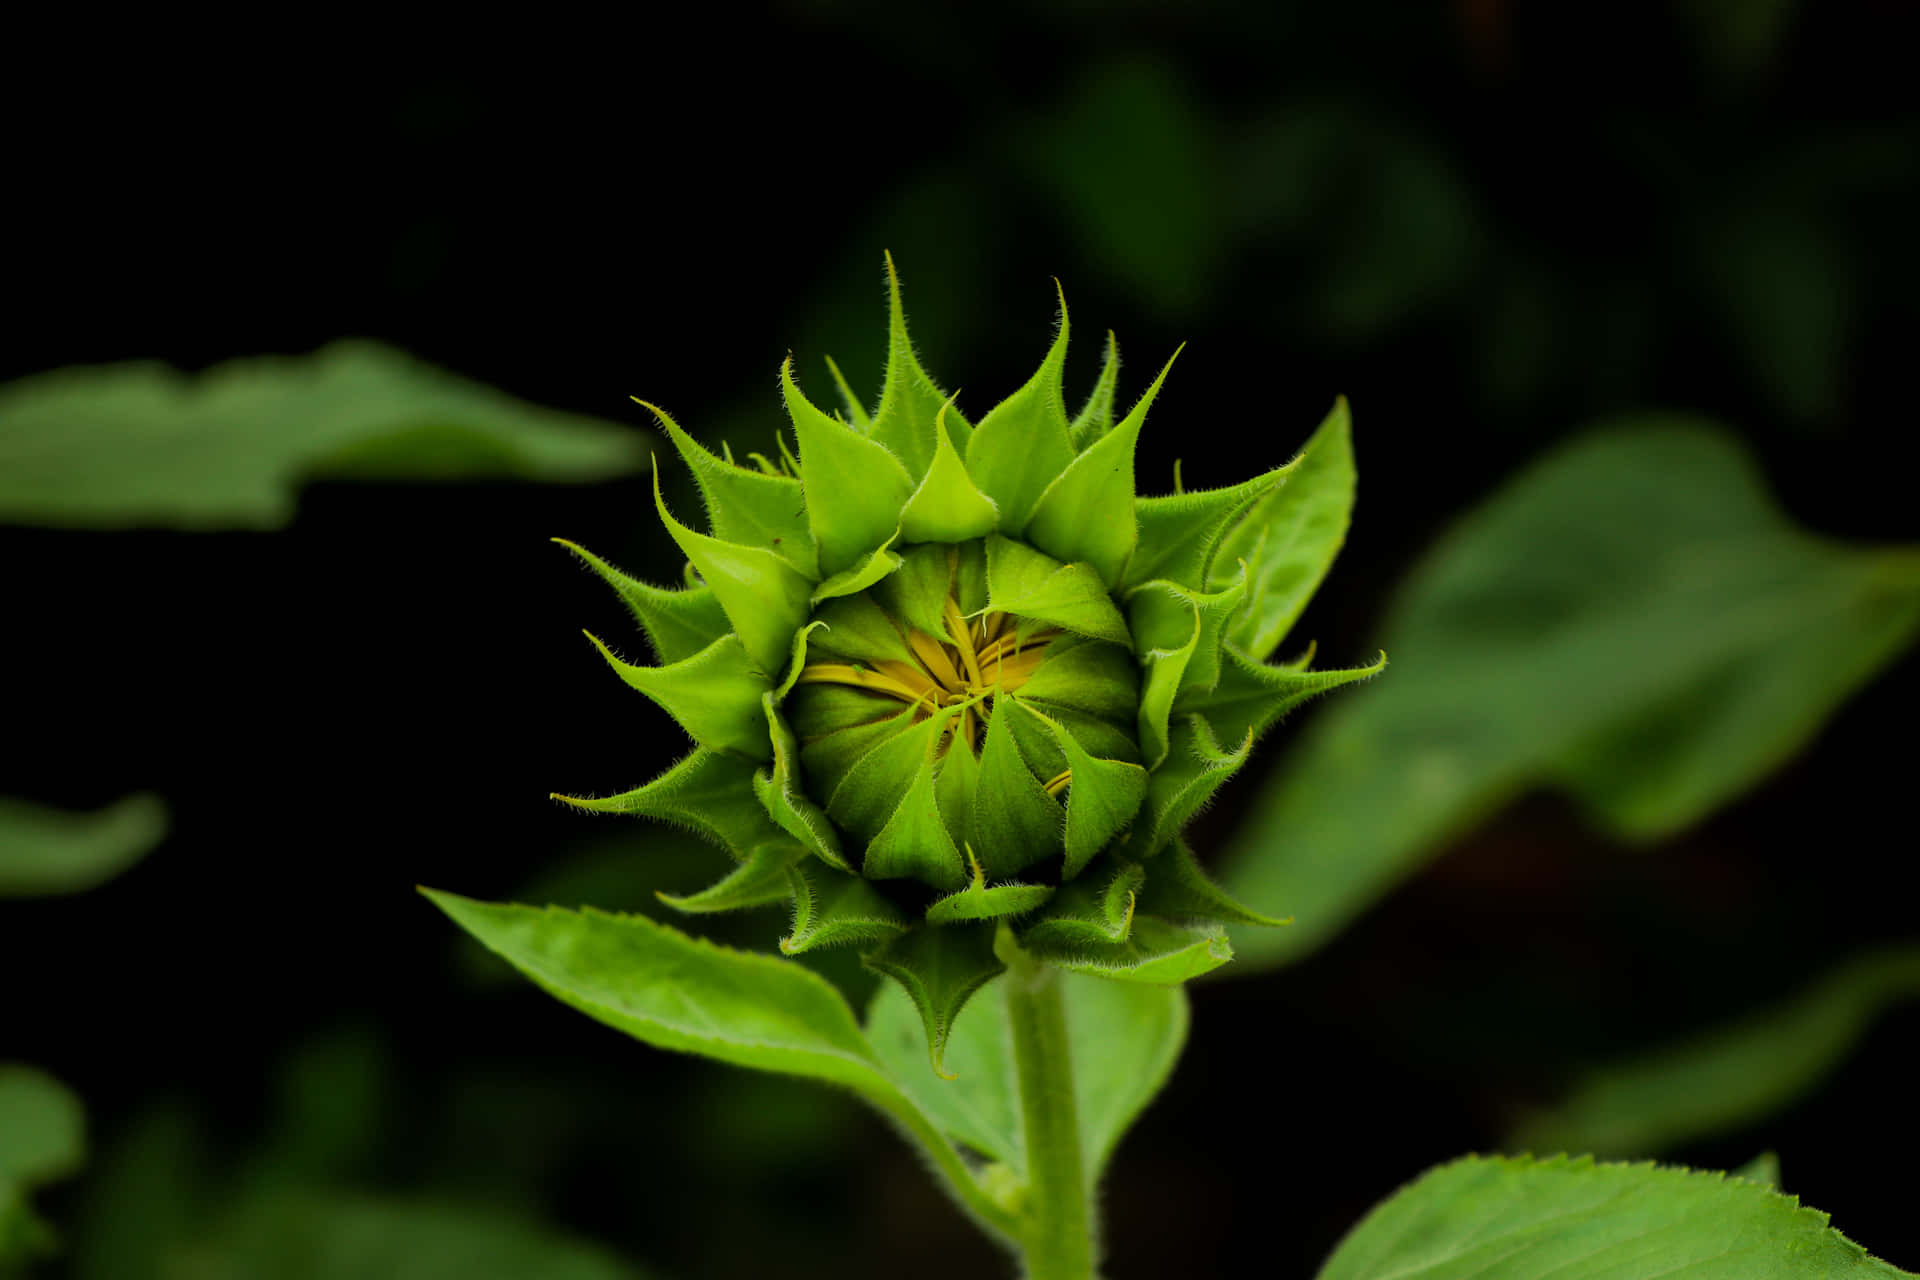 A Green Flower With A Yellow Center